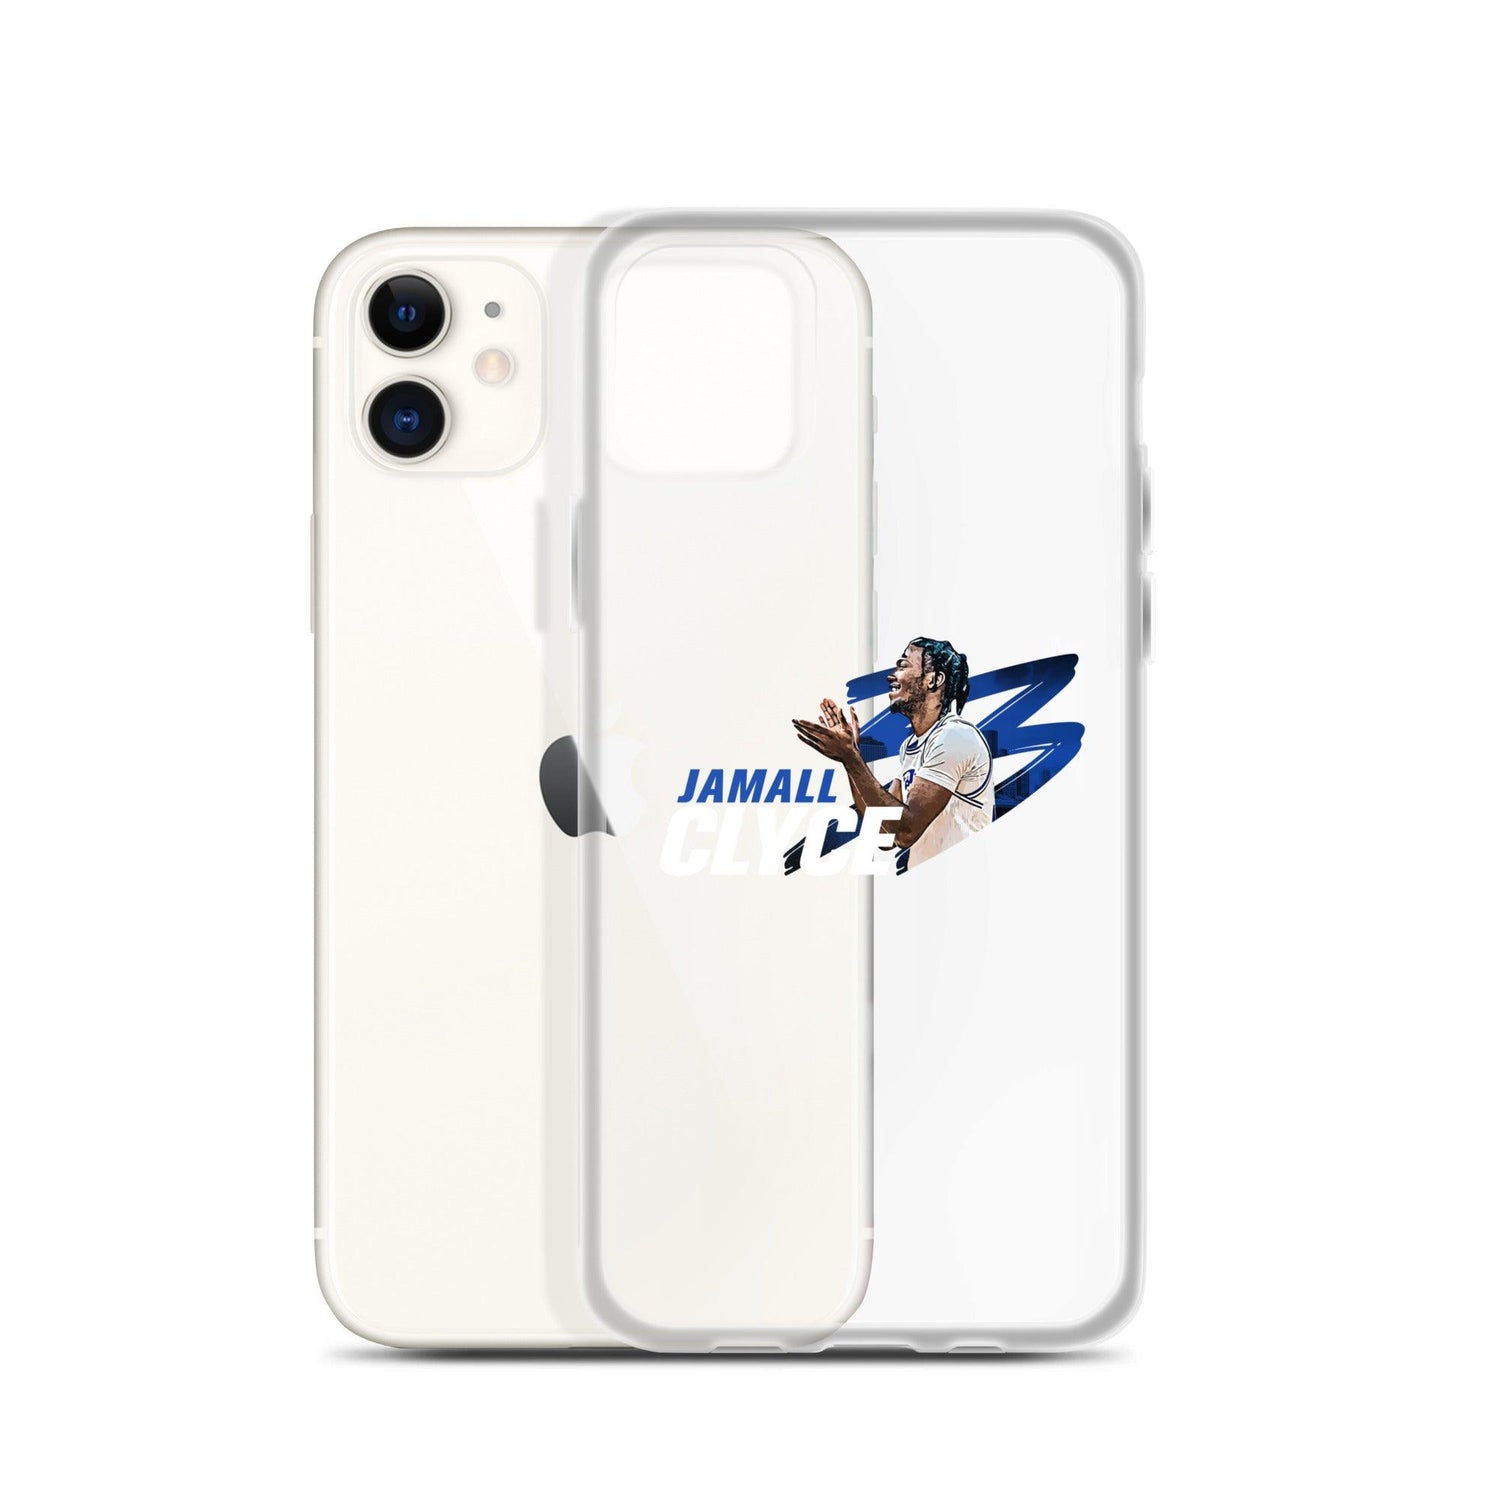 Jamall Clyce "Gameday" iPhone® - Fan Arch